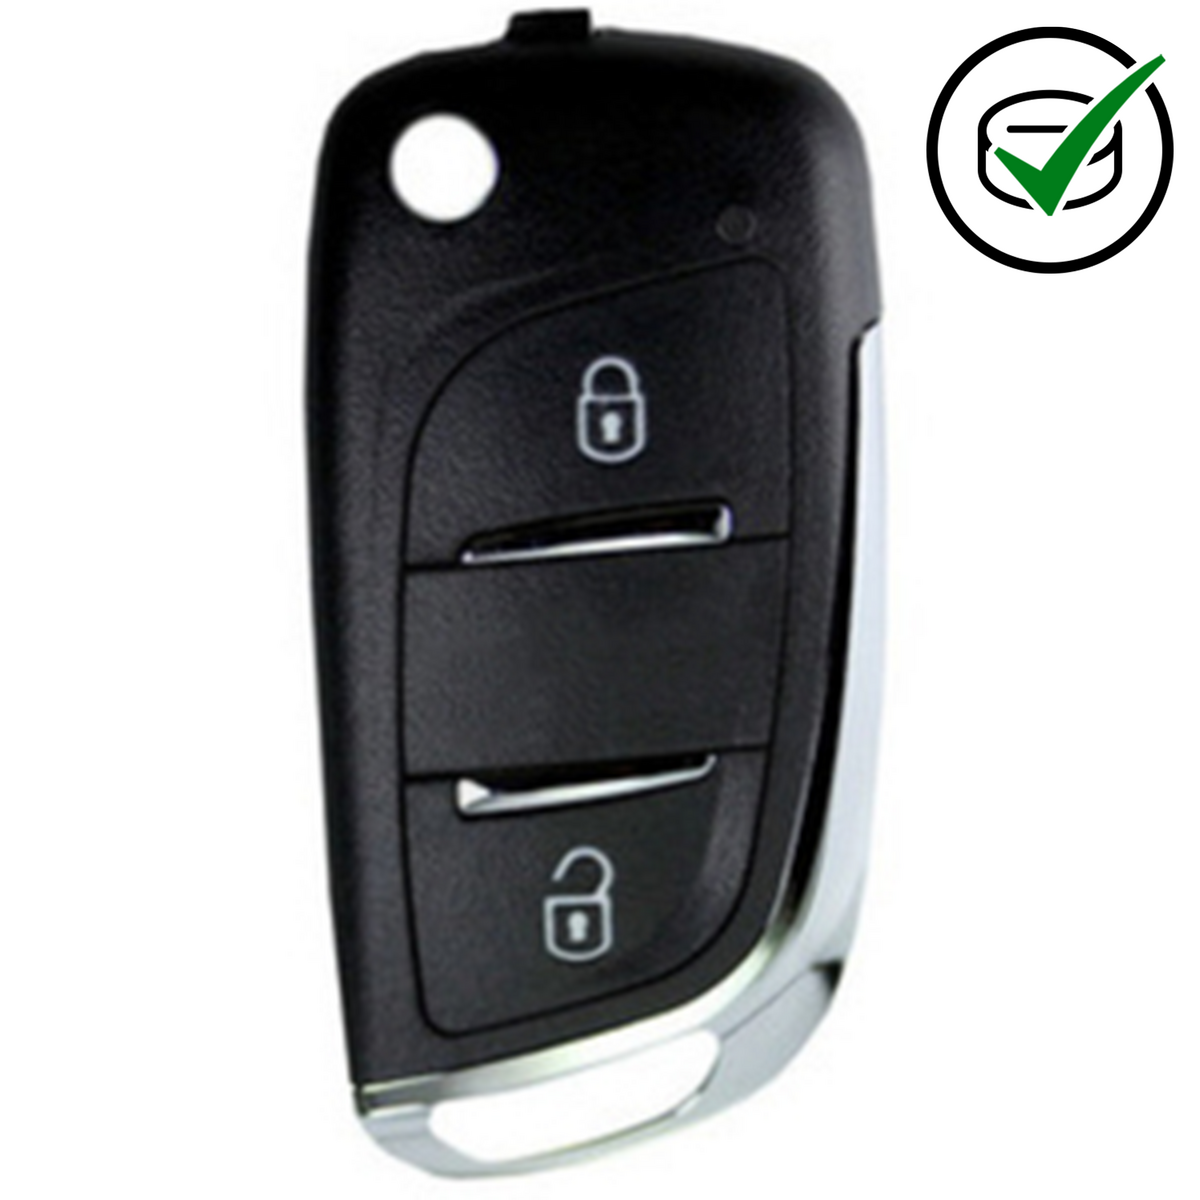 KD 900 Key remote 2 button Peugeot Style Universal with Integrated Transponder Chip